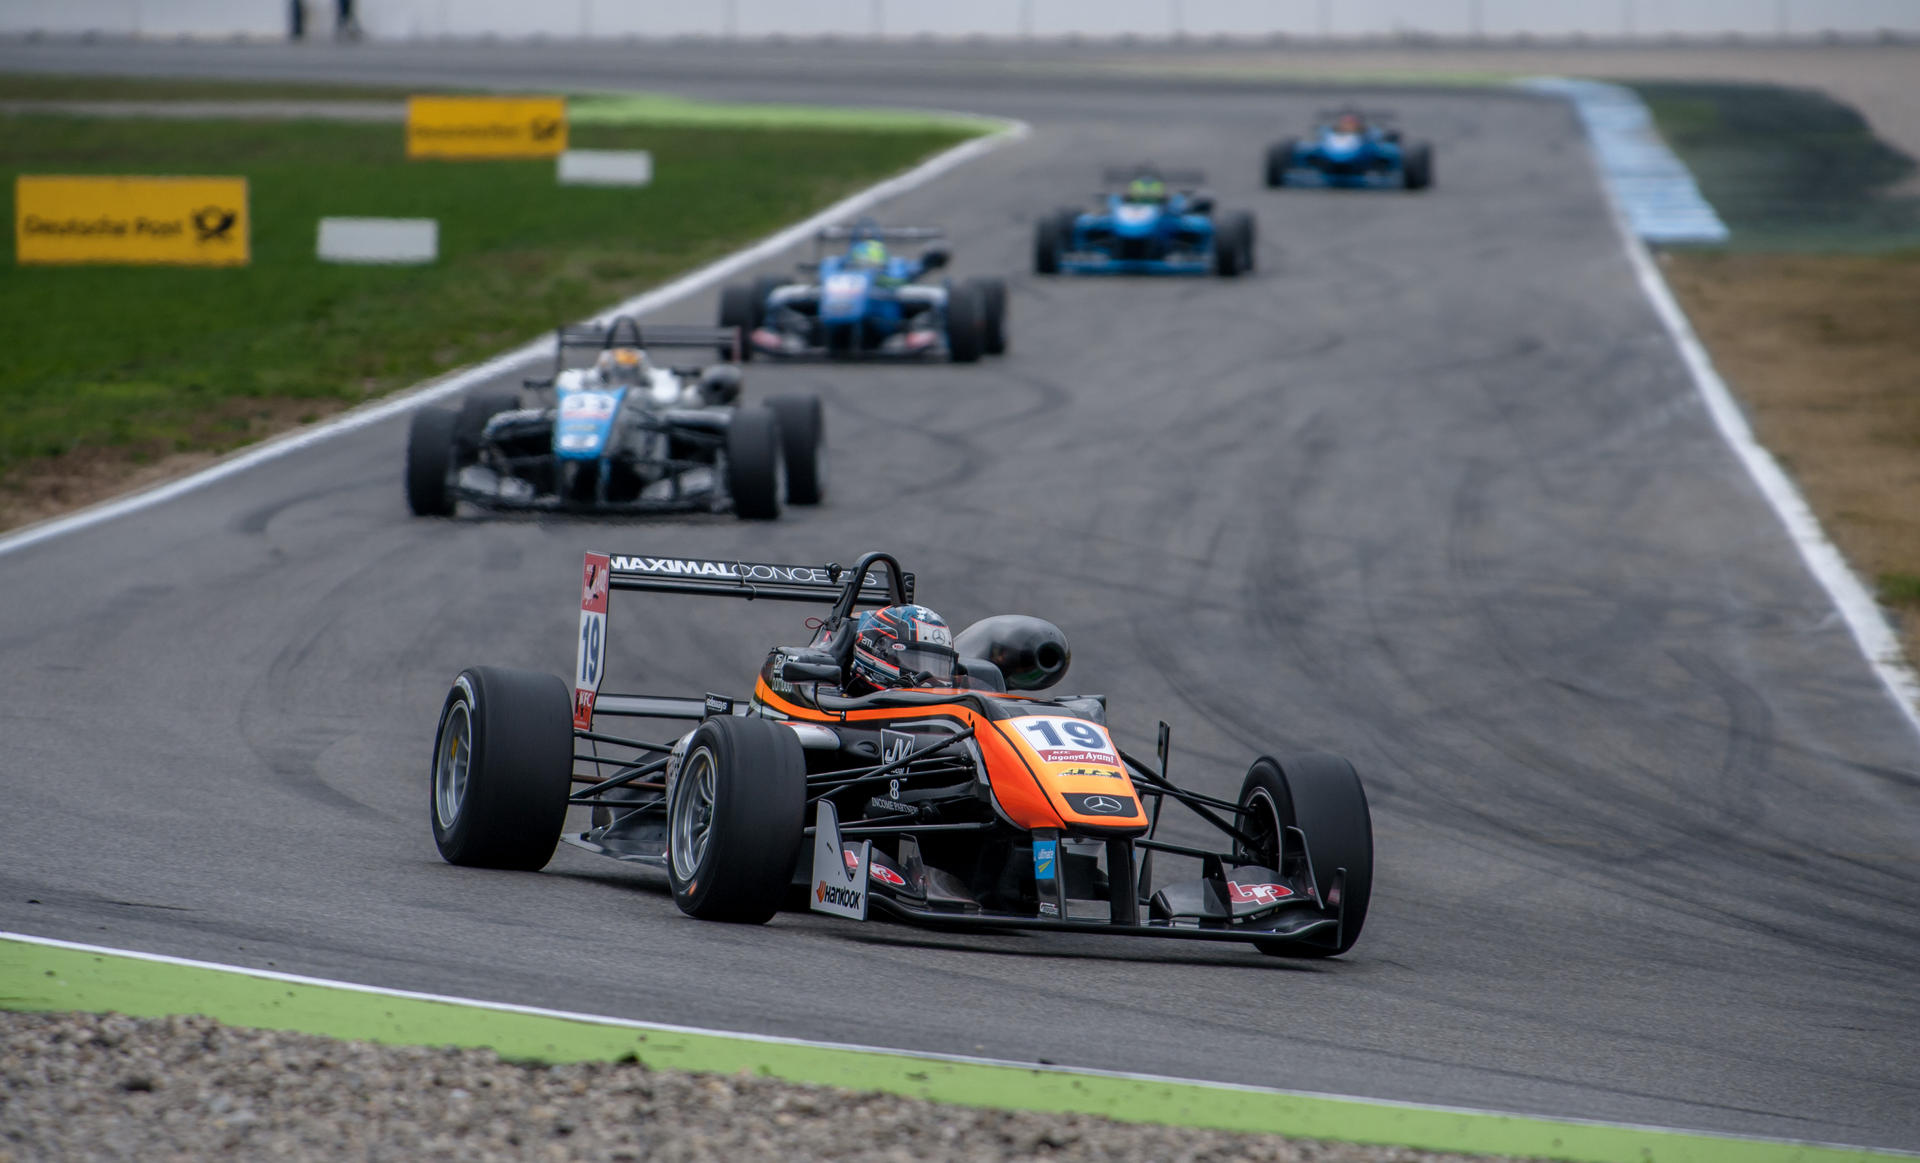 Matthew Solomon endured a testing maiden campaign competing in the FIA Formula Three European Championship, but has high hopes for the Macau Grand Prix. Photos: SCMP Pictures